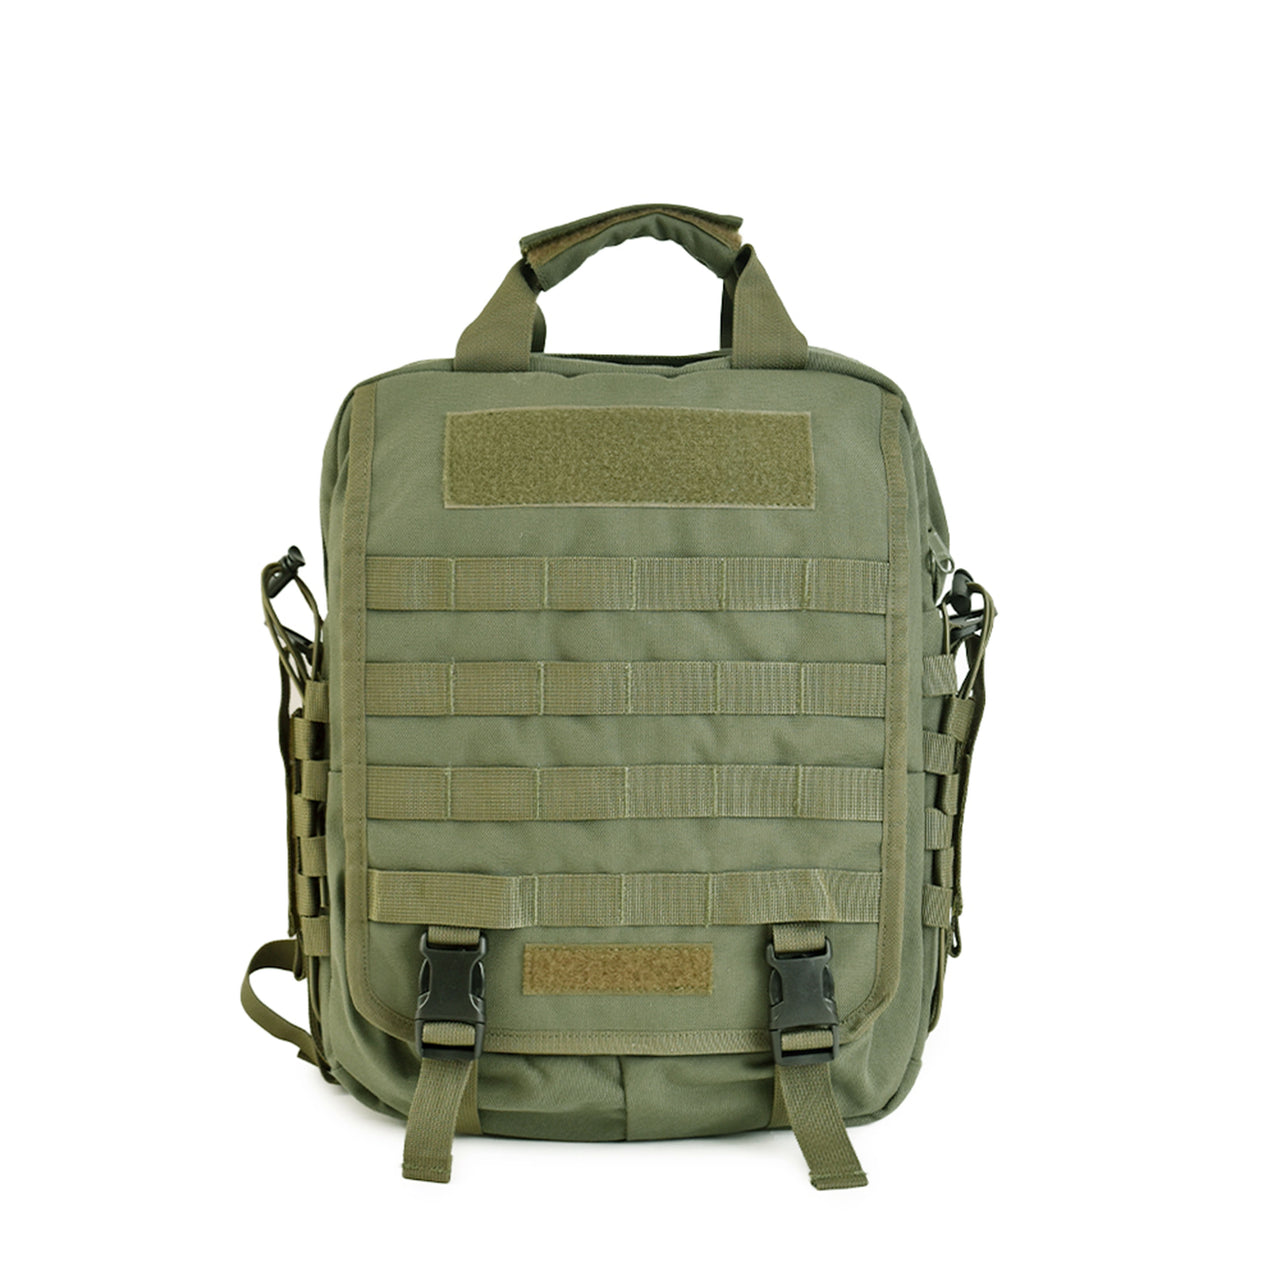 Military Laptop Backpack - 15 Inches